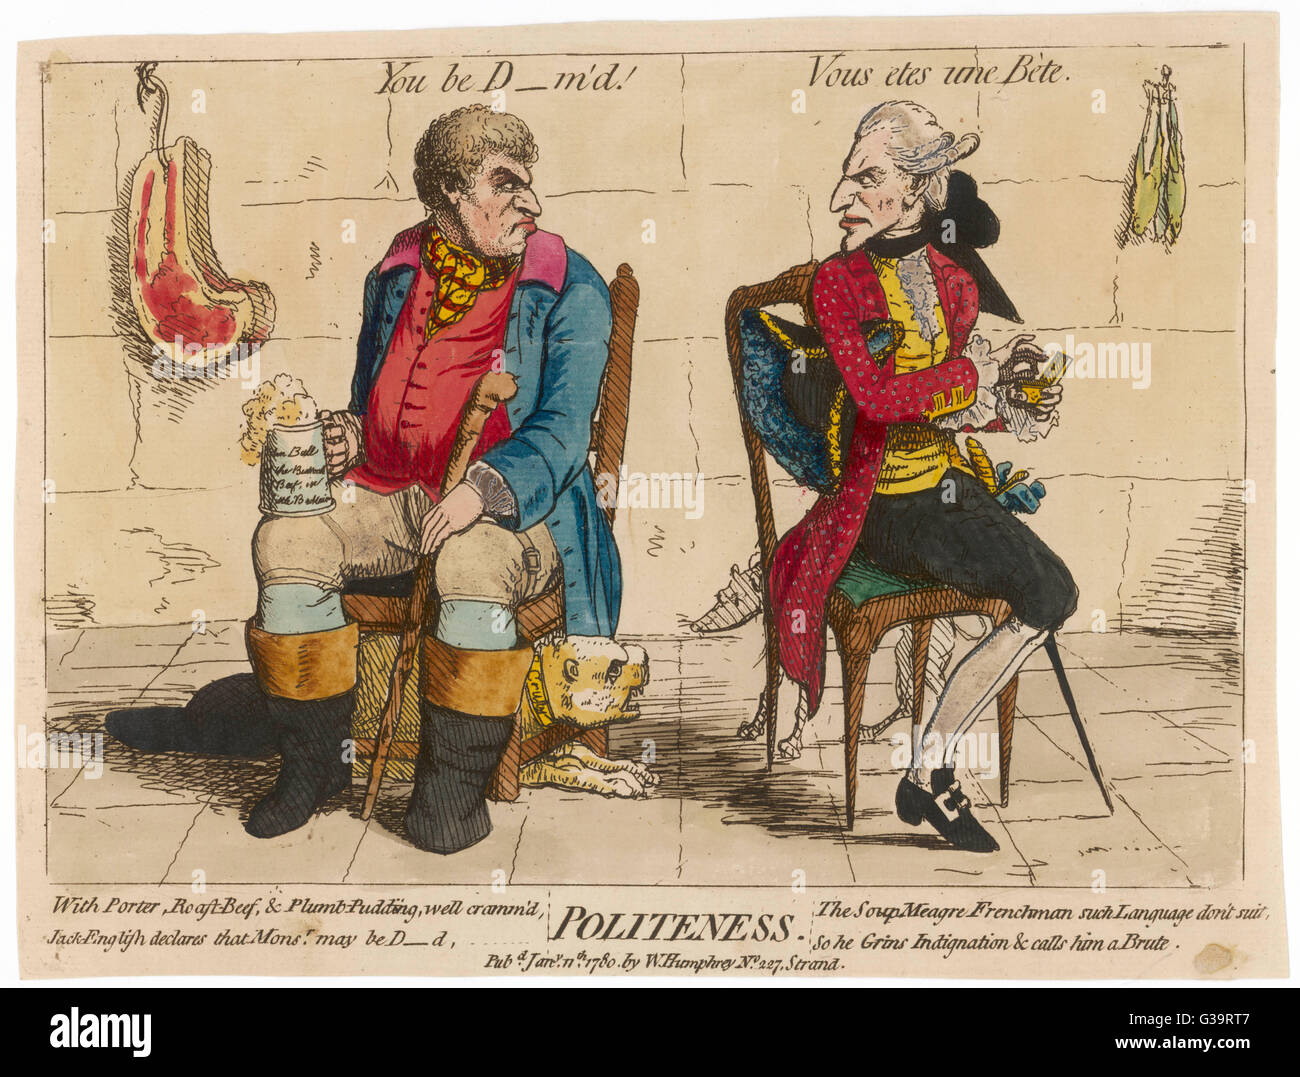 'Politeness' The state of Anglo-French relations played out by John Bull and his French counterpart.     Date: 1780 Stock Photo